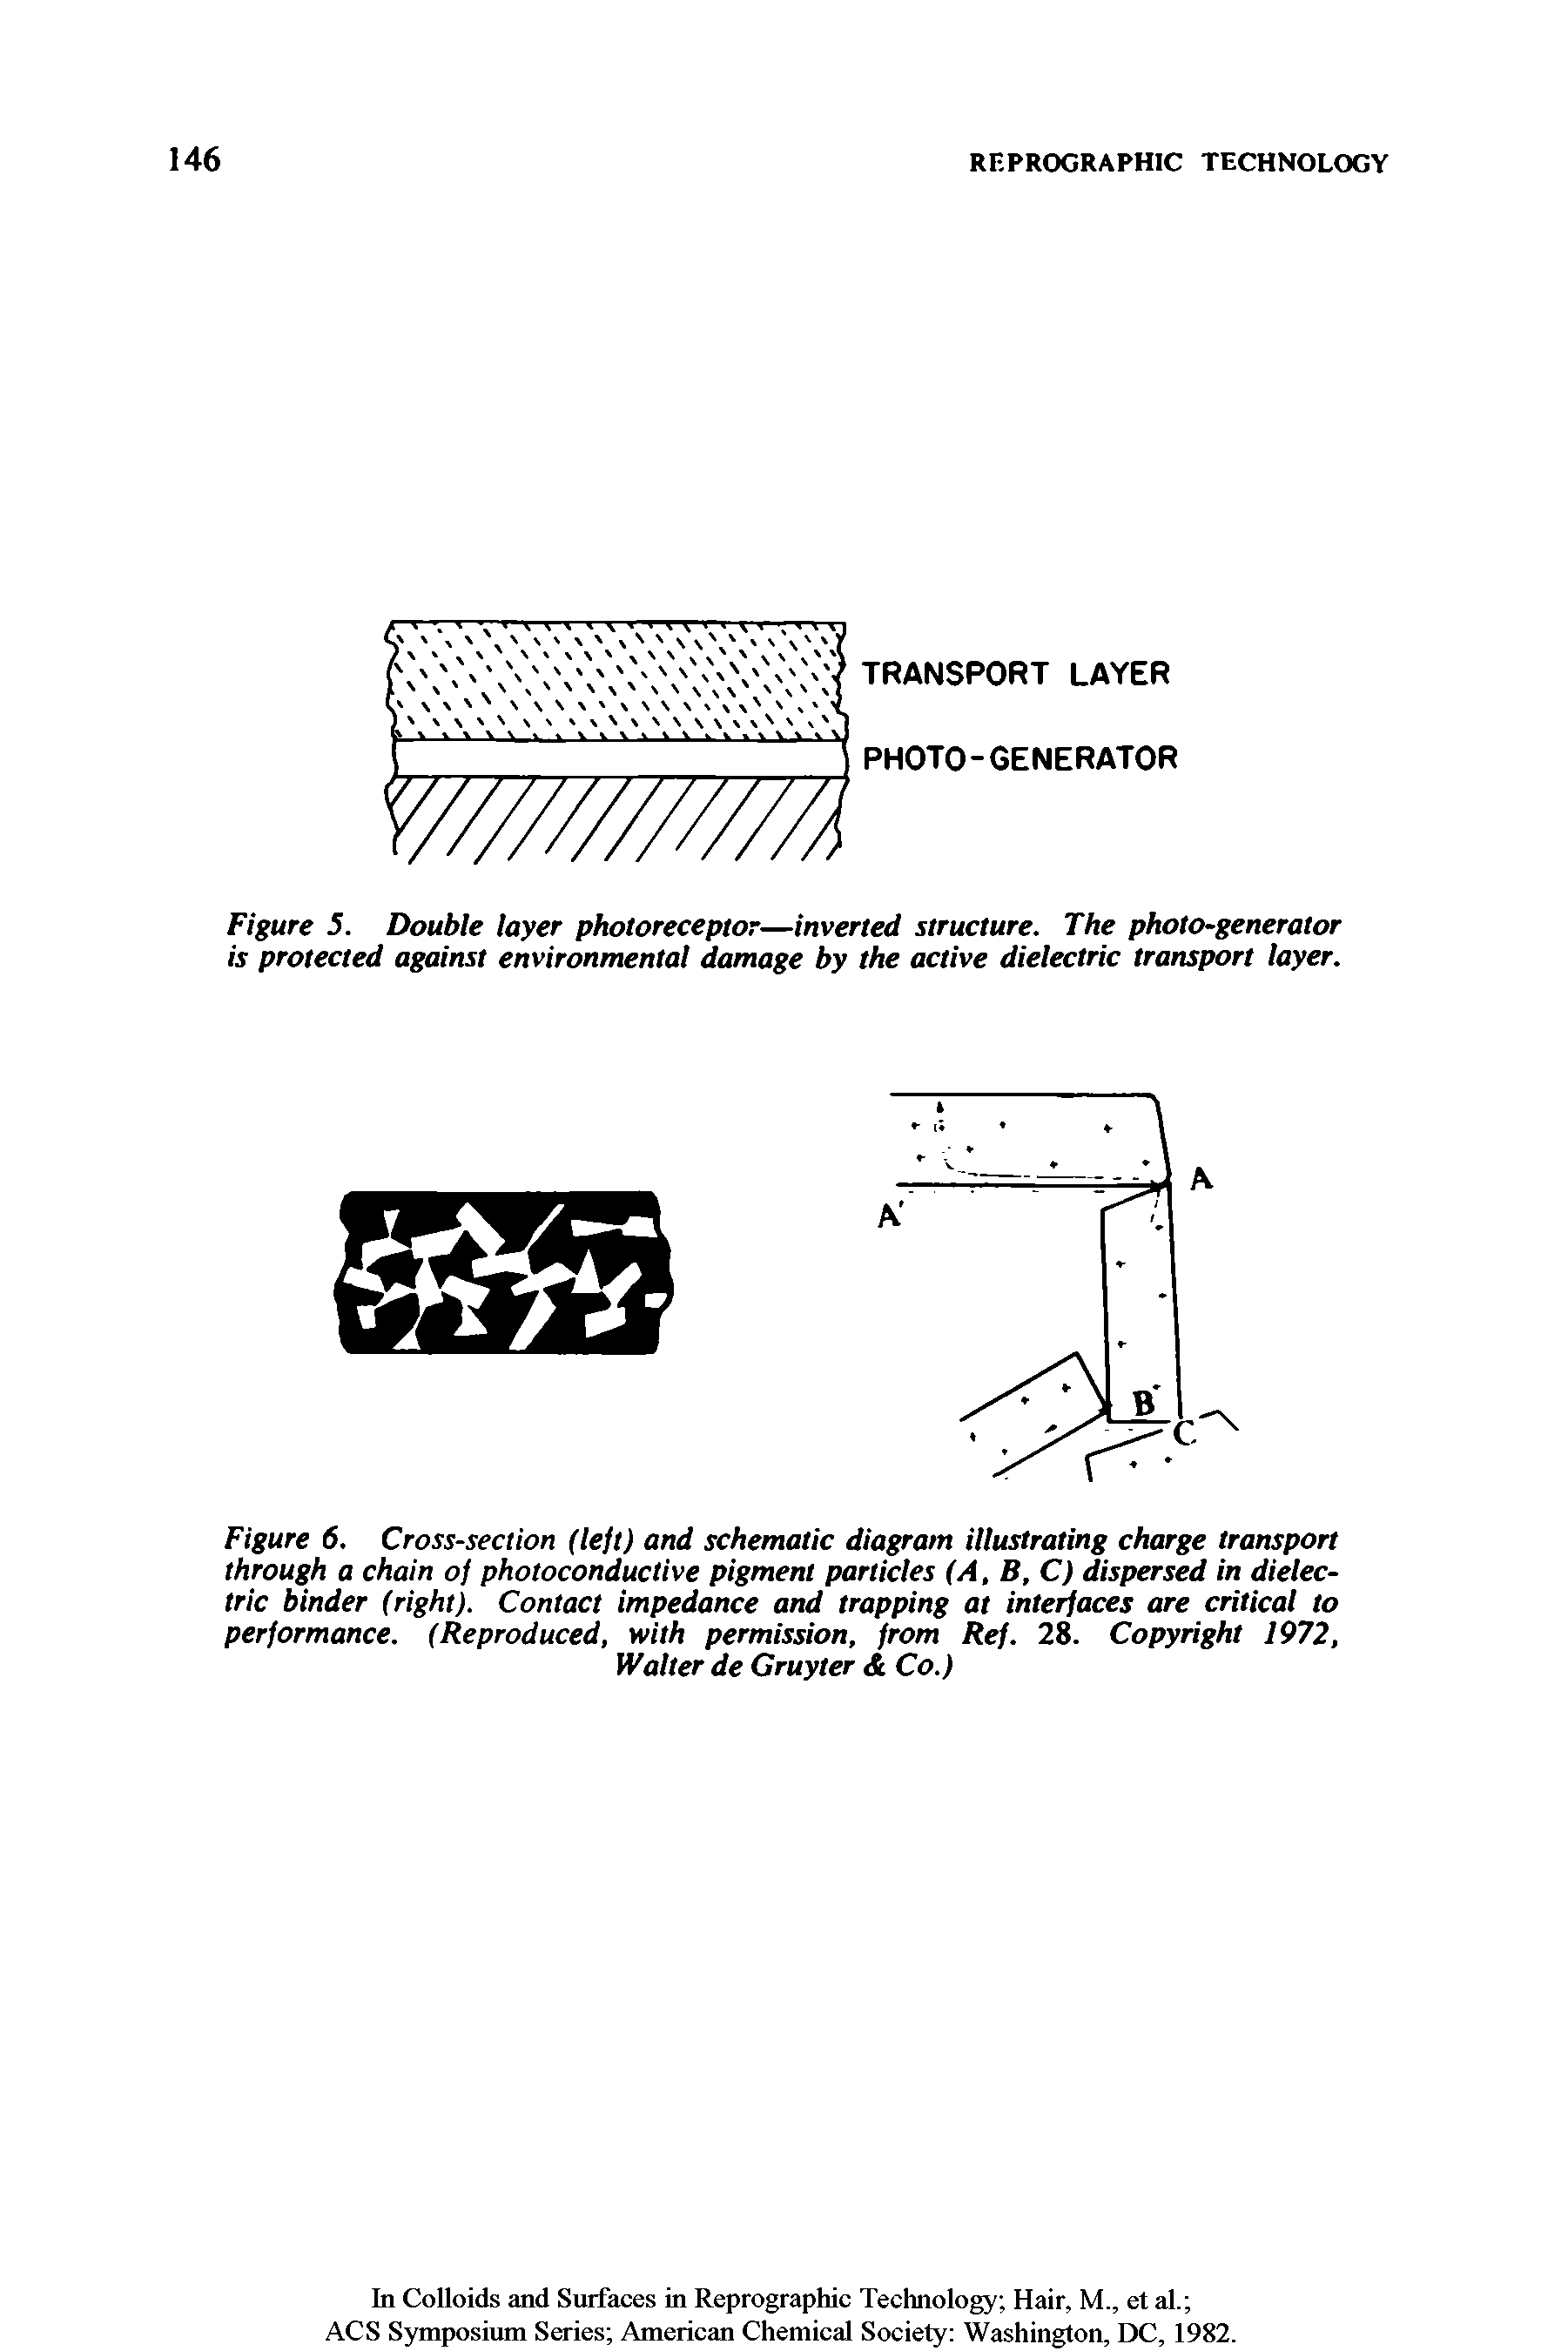 Figure 6. Cross-section (left) and schematic diagram illustrating charge transport through a chain of photoconductive pigment particles (A, B, C) dispersed in dielectric binder (right). Contact impedance and trapping at interfaces are critical to performance. (Reproduced, with permission, from Ref. 28. Copyright 1972,...